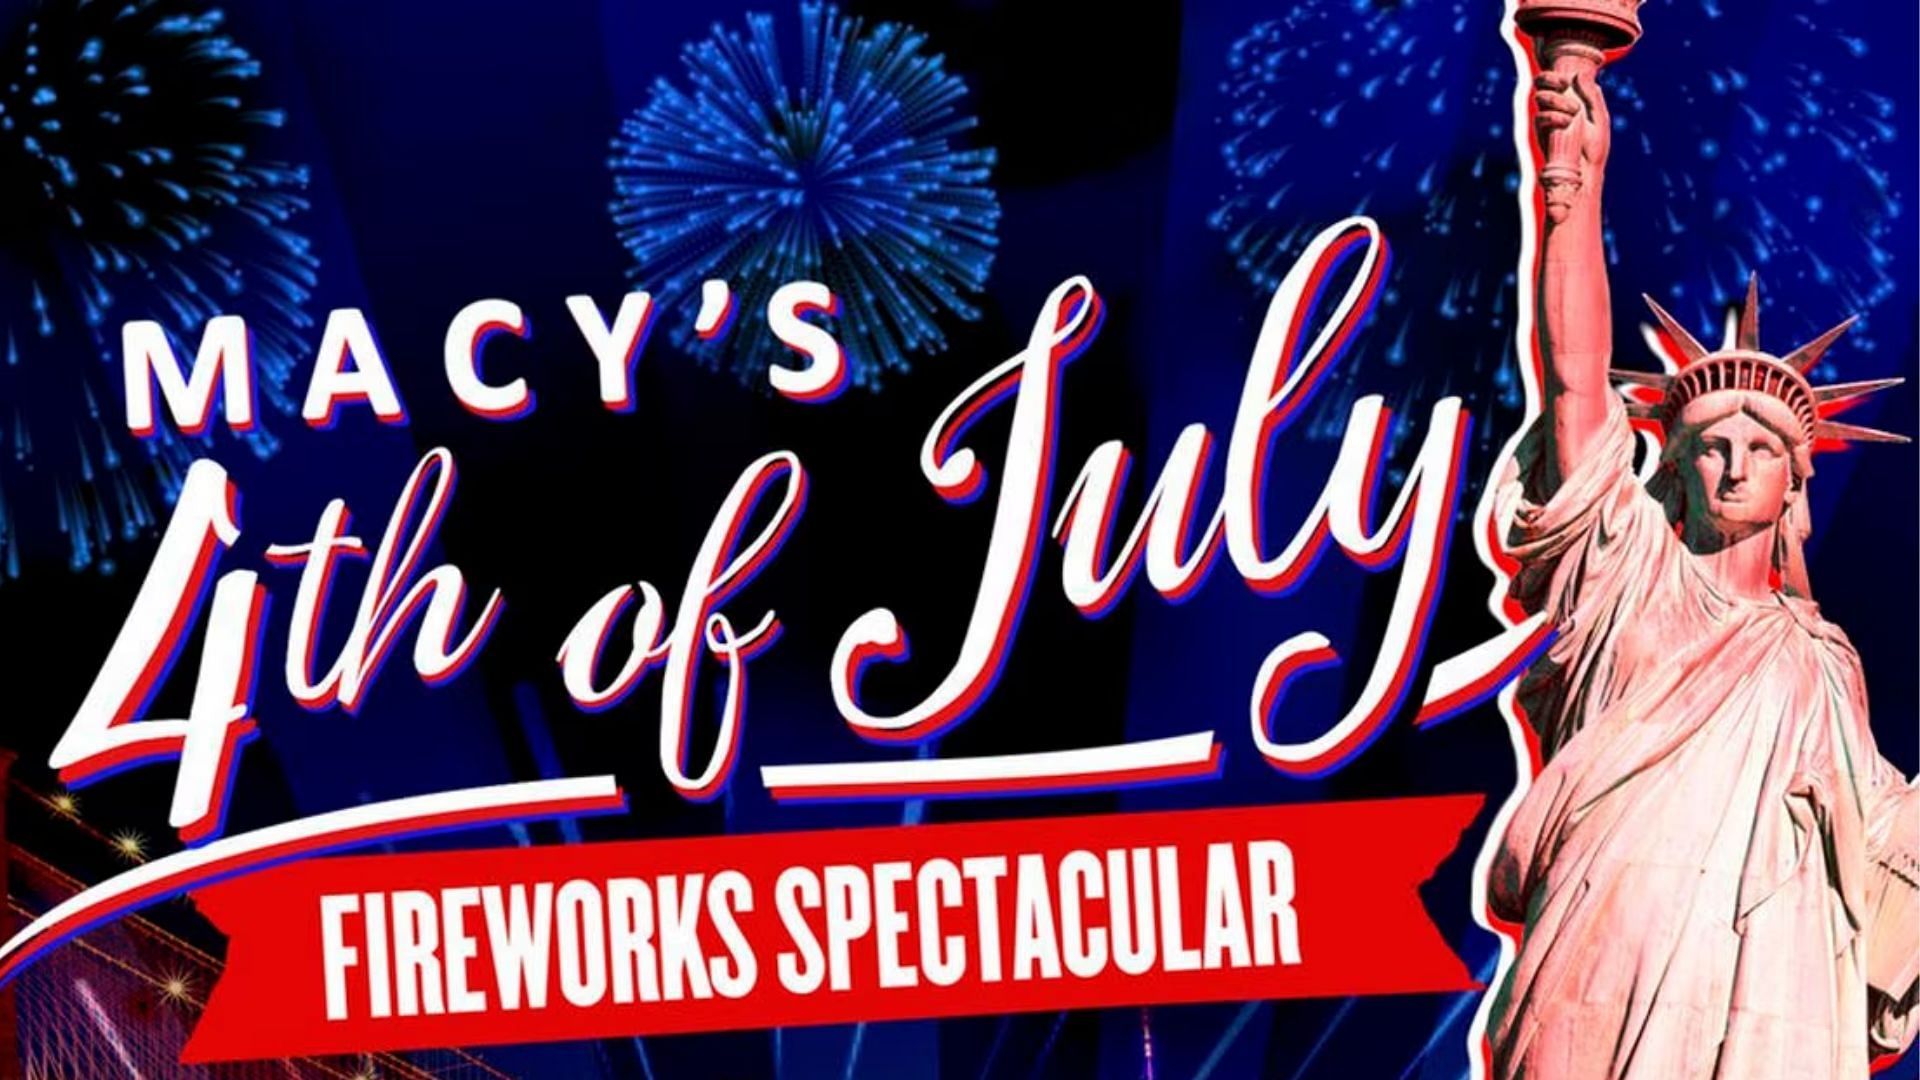 Where to watch Macy's 4th of July Fireworks Spectacular? Details explored